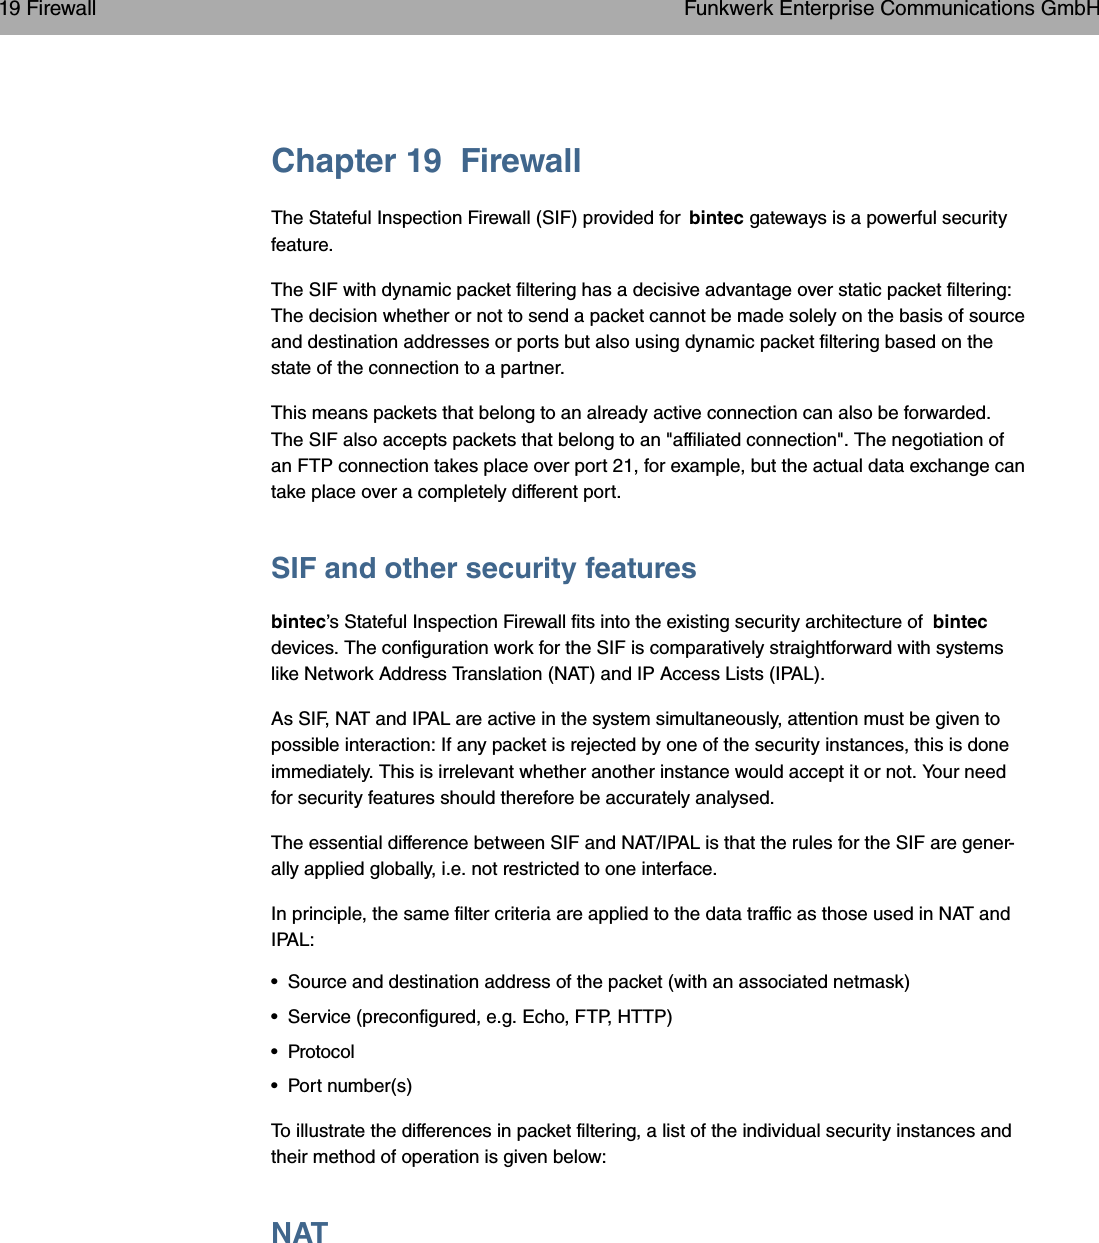 Chapter 19 FirewallThe Stateful Inspection Firewall (SIF) provided for bintec gateways is a powerful securityfeature.The SIF with dynamic packet filtering has a decisive advantage over static packet filtering:The decision whether or not to send a packet cannot be made solely on the basis of sourceand destination addresses or ports but also using dynamic packet filtering based on thestate of the connection to a partner.This means packets that belong to an already active connection can also be forwarded.The SIF also accepts packets that belong to an &quot;affiliated connection&quot;. The negotiation ofan FTP connection takes place over port 21, for example, but the actual data exchange cantake place over a completely different port.SIF and other security featuresbintec’s Stateful Inspection Firewall fits into the existing security architecture of bintecdevices. The configuration work for the SIF is comparatively straightforward with systemslike Network Address Translation (NAT) and IP Access Lists (IPAL).As SIF, NAT and IPAL are active in the system simultaneously, attention must be given topossible interaction: If any packet is rejected by one of the security instances, this is doneimmediately. This is irrelevant whether another instance would accept it or not. Your needfor security features should therefore be accurately analysed.The essential difference between SIF and NAT/IPAL is that the rules for the SIF are gener-ally applied globally, i.e. not restricted to one interface.In principle, the same filter criteria are applied to the data traffic as those used in NAT andIPAL:• Source and destination address of the packet (with an associated netmask)• Service (preconfigured, e.g. Echo, FTP, HTTP)• Protocol• Port number(s)To illustrate the differences in packet filtering, a list of the individual security instances andtheir method of operation is given below:NAT19 Firewall Funkwerk Enterprise Communications GmbH260 bintec WLAN and Industrial WLAN